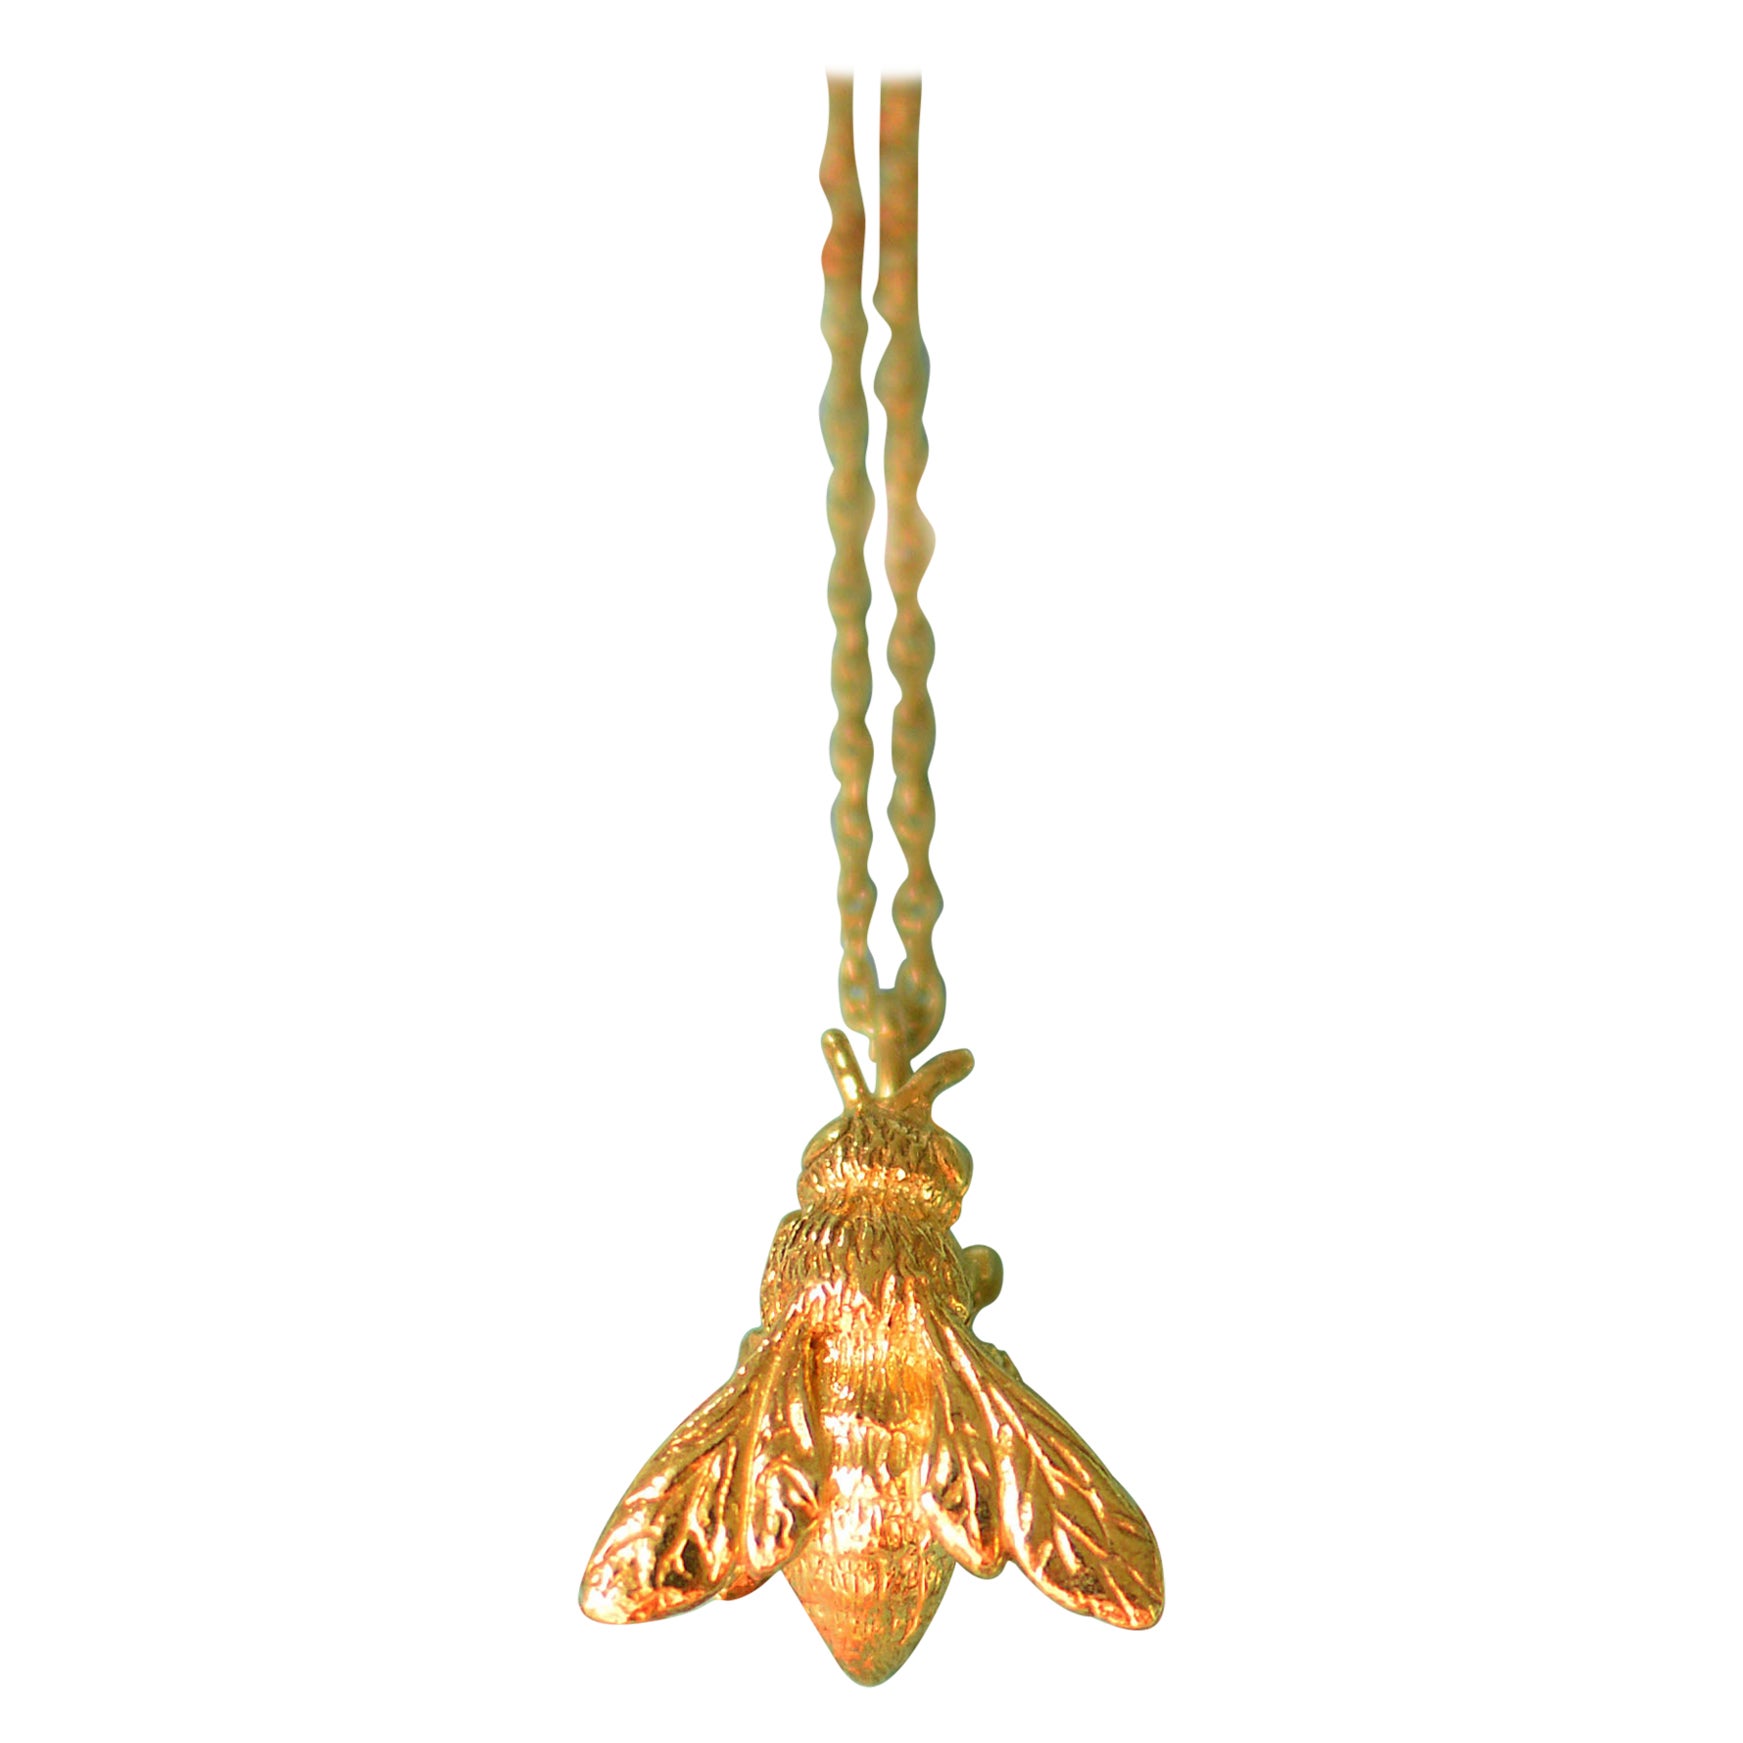 Solid 18 Carat Gold Honey Bee Pendant by Lucy Stopes-Roe For Sale